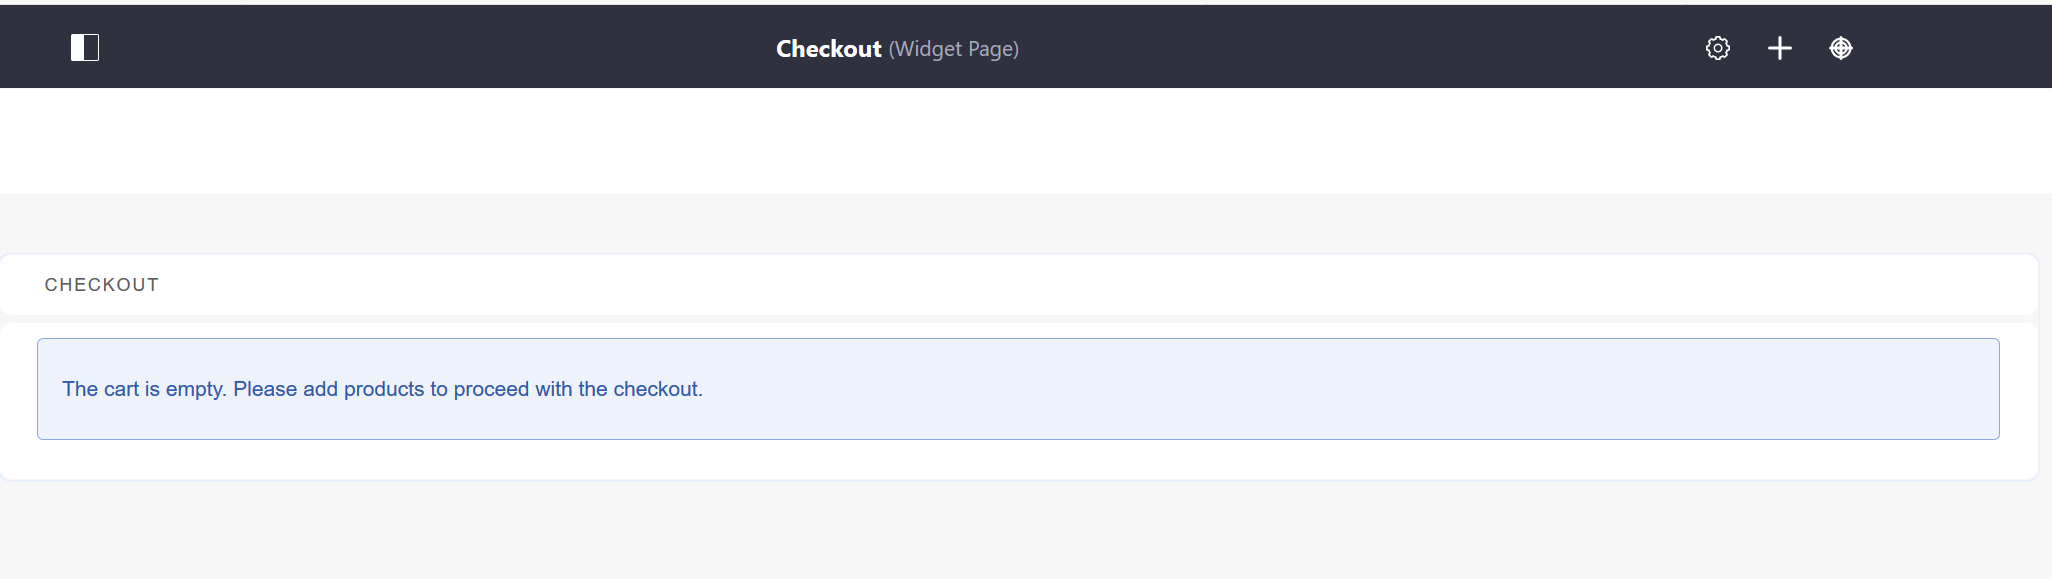 When there's no active order, the Checkout widget is empty.